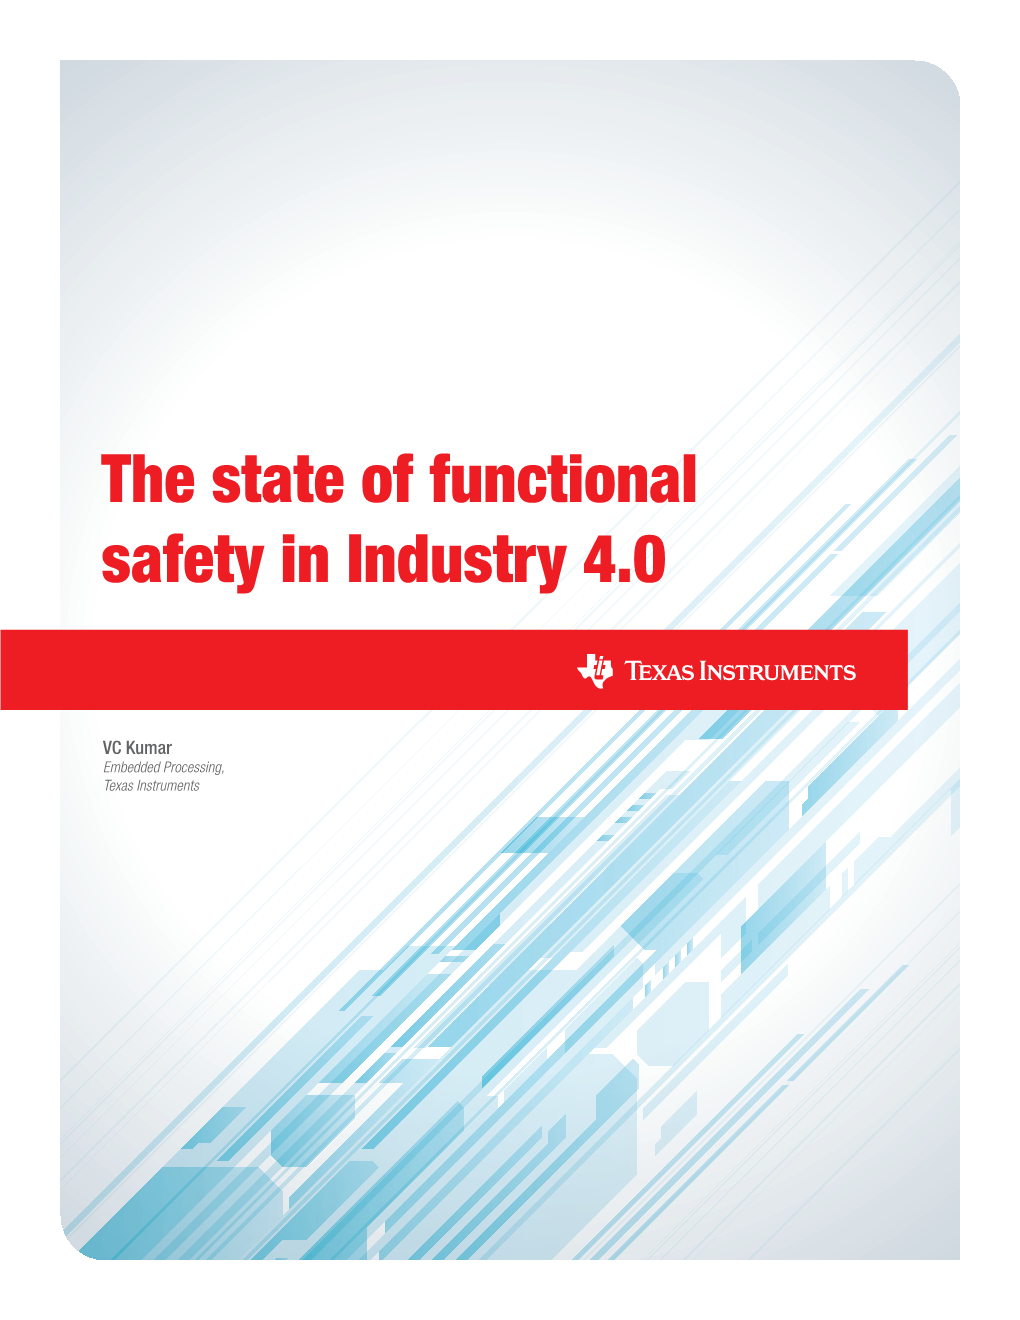 The State of Functional Safety in Industry 4.0